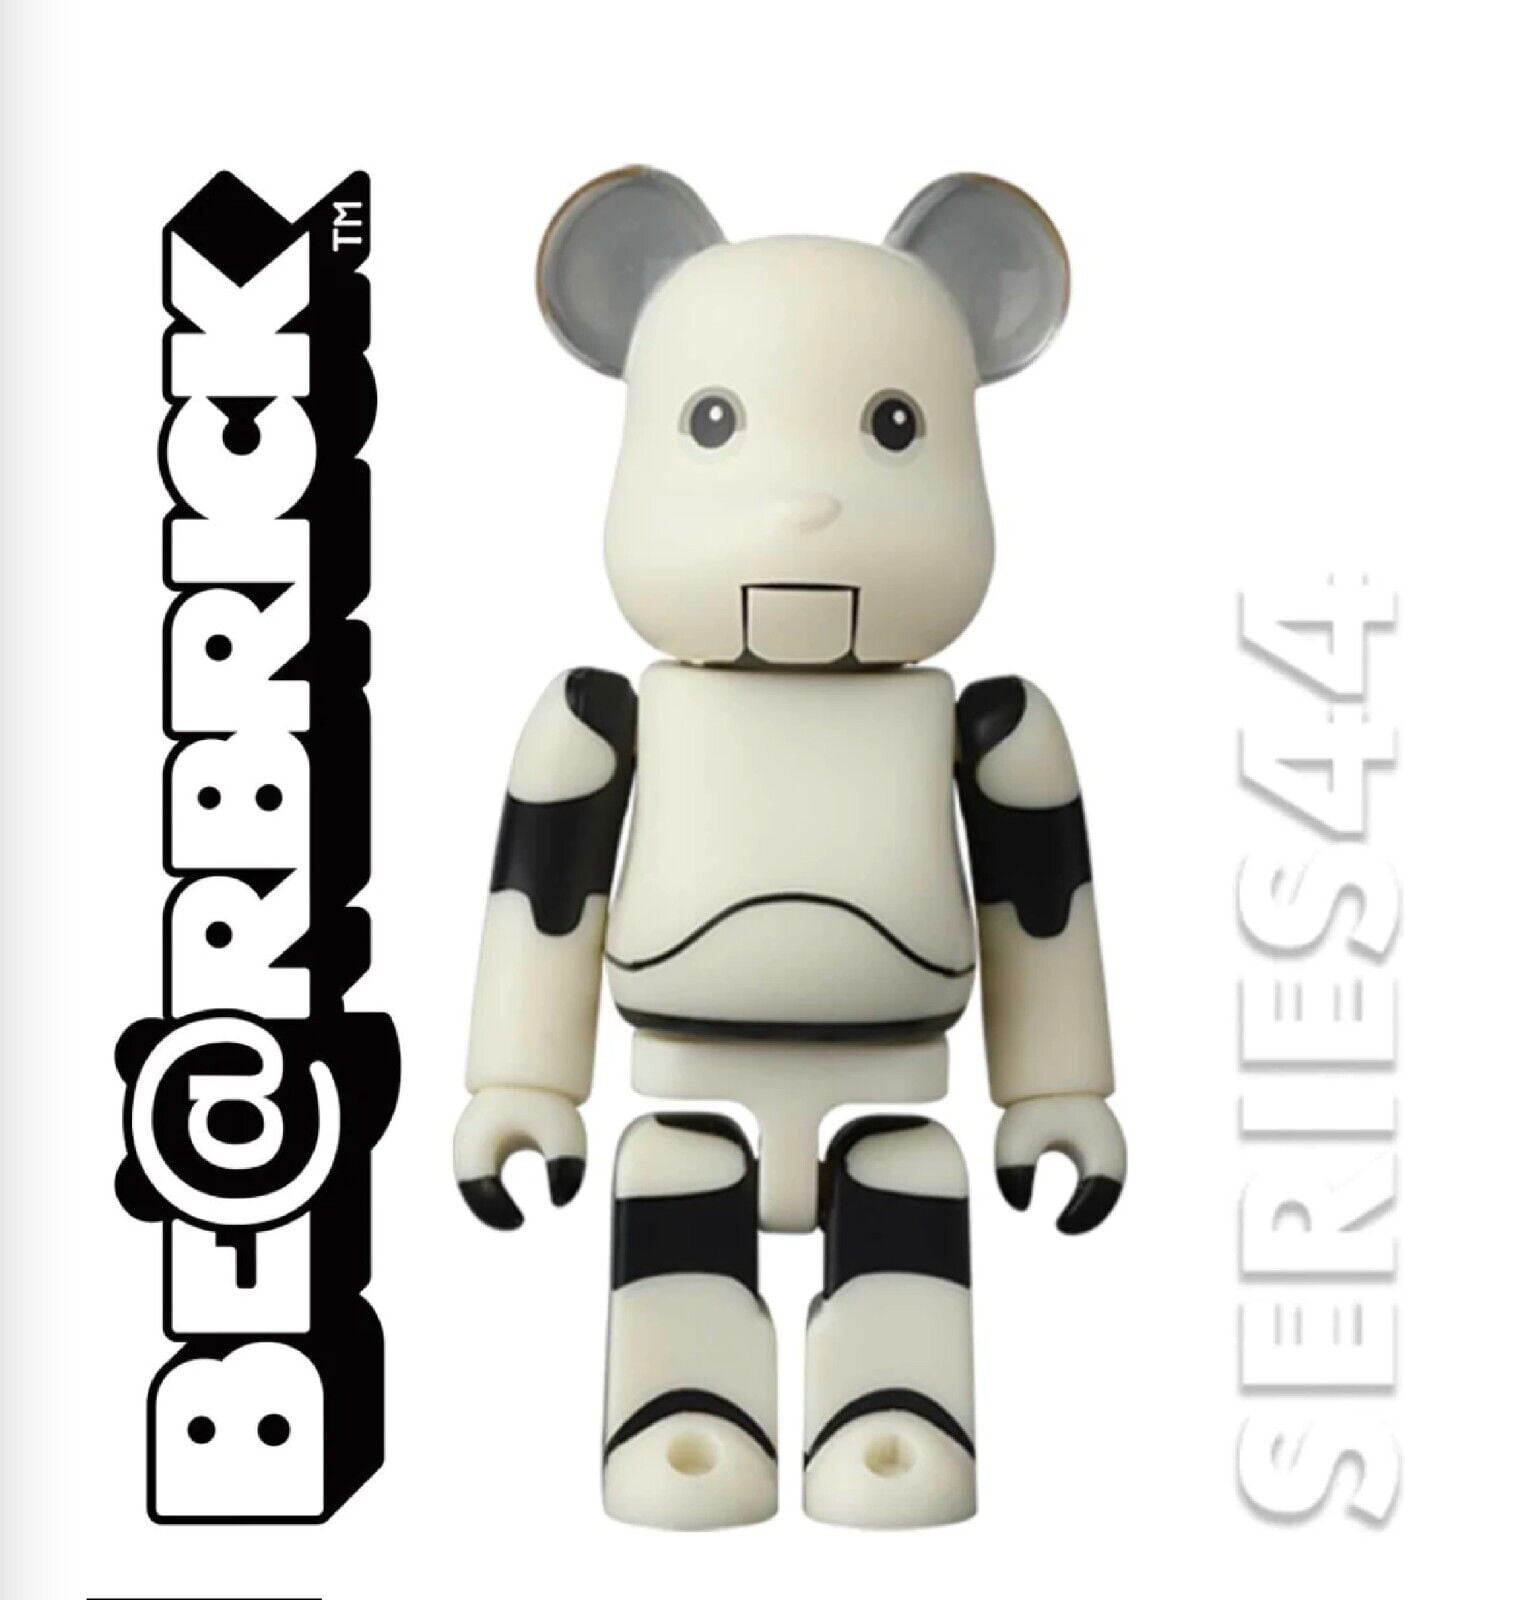 Bearbrick Wallpaper Explore more Bearbrick CartoonStyle Collectible Toy  Japanese Kubrick wallpaper httpswwwwhatsp  Wallpaper Gundam  wallpapers Art toy